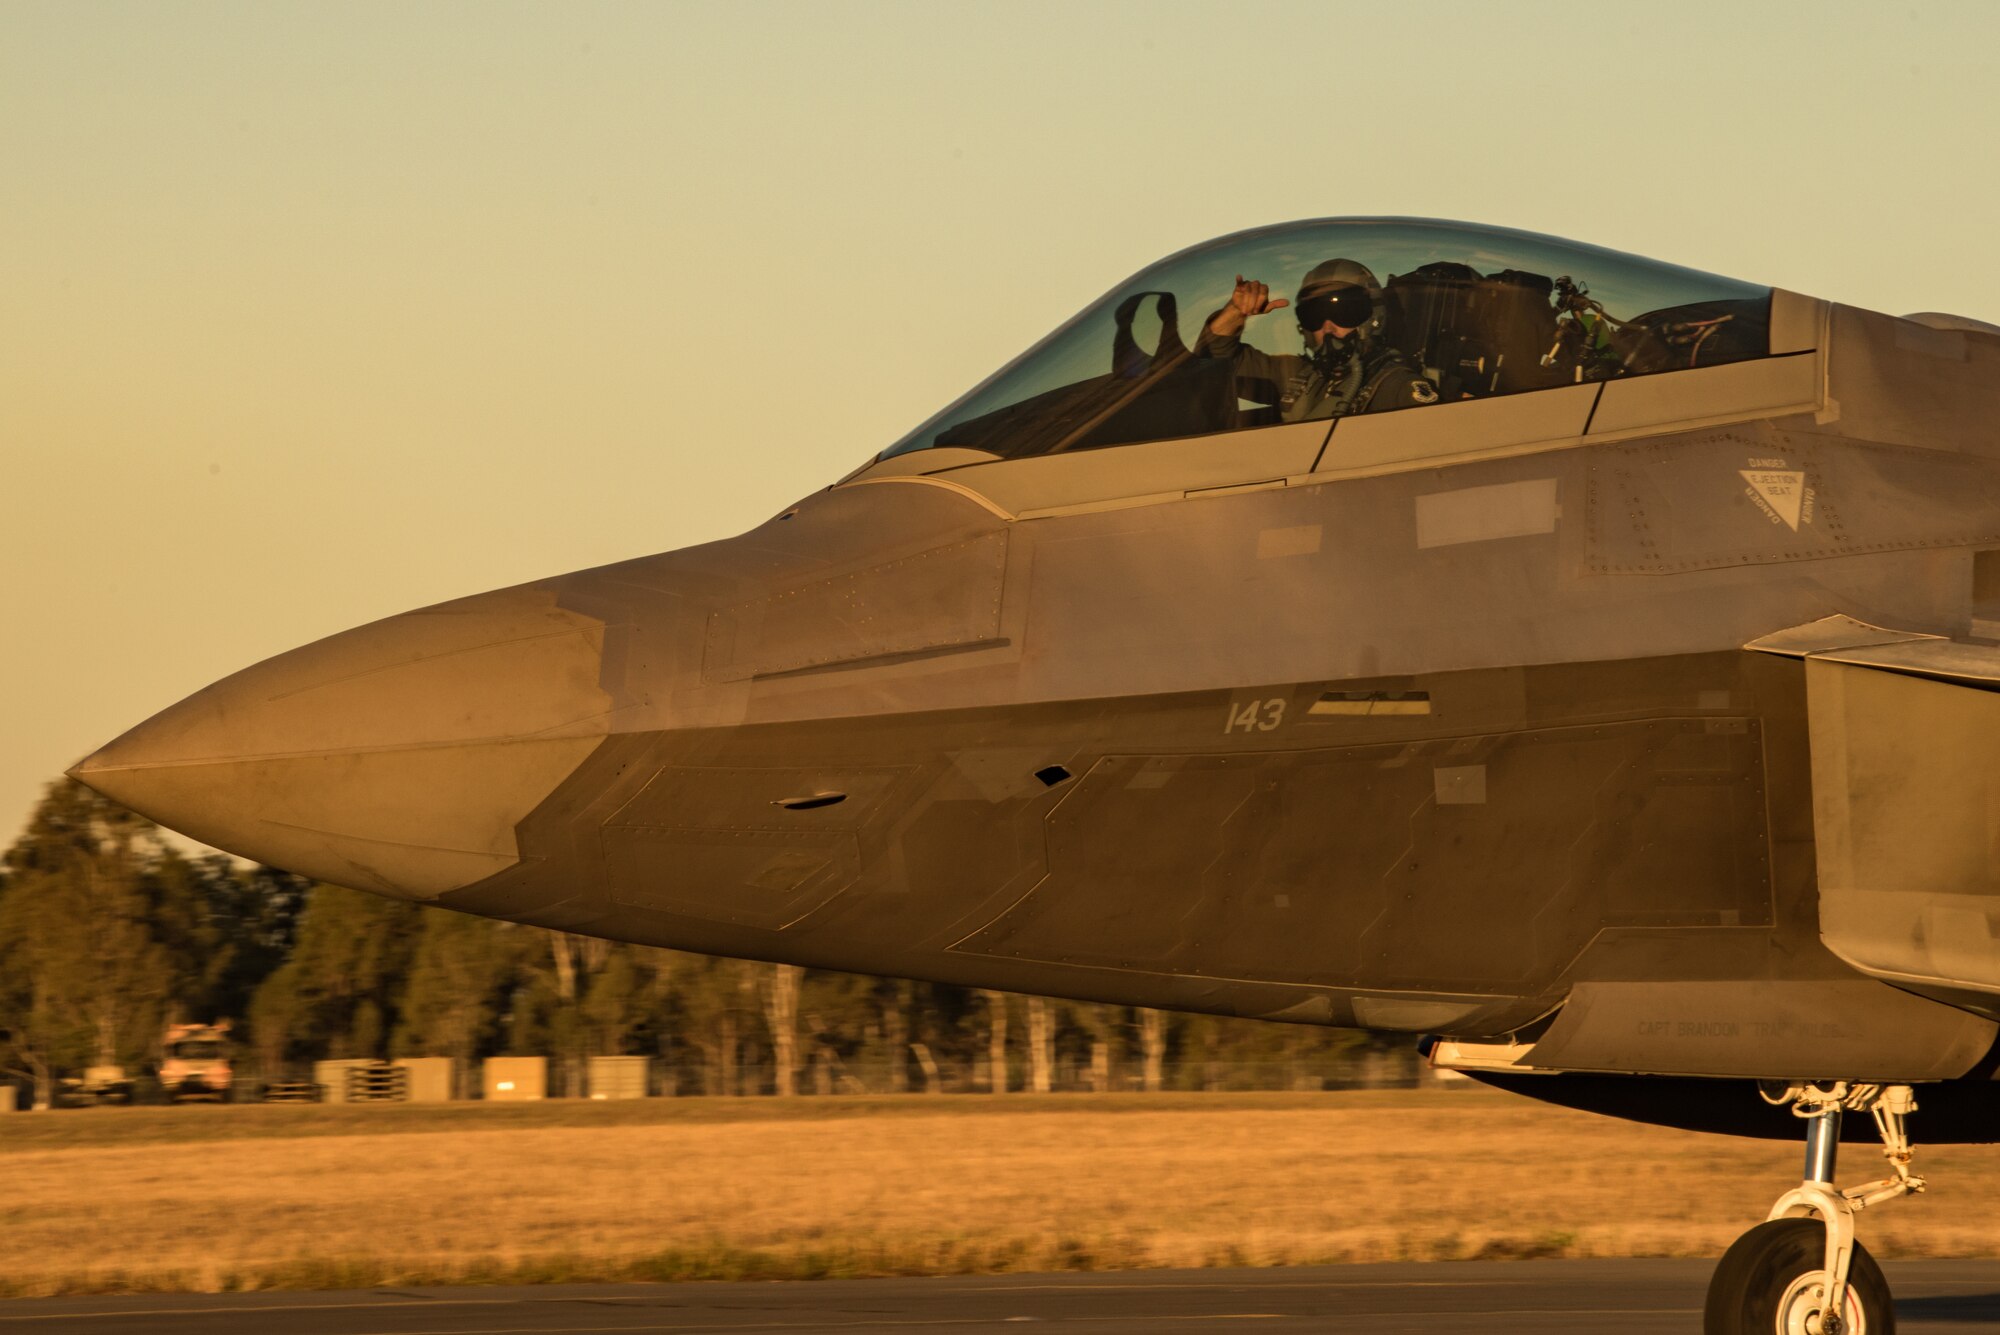 An F-22 Raptor assigned to the 90th Fighter Squadron, Joint Base Elmendorf-Richardson, Alaska, taxis to its parking location at the Royal Australian Air Force Base Amberley flightline for Talisman Sabre 2019, July 9. Talisman Sabre provides effective and intense training to ensure U.S. Forces are combat ready, capable, interoperable, and deployable on short notice. (U.S. Air Force photo by Staff Sgt. Kyle Johnson)